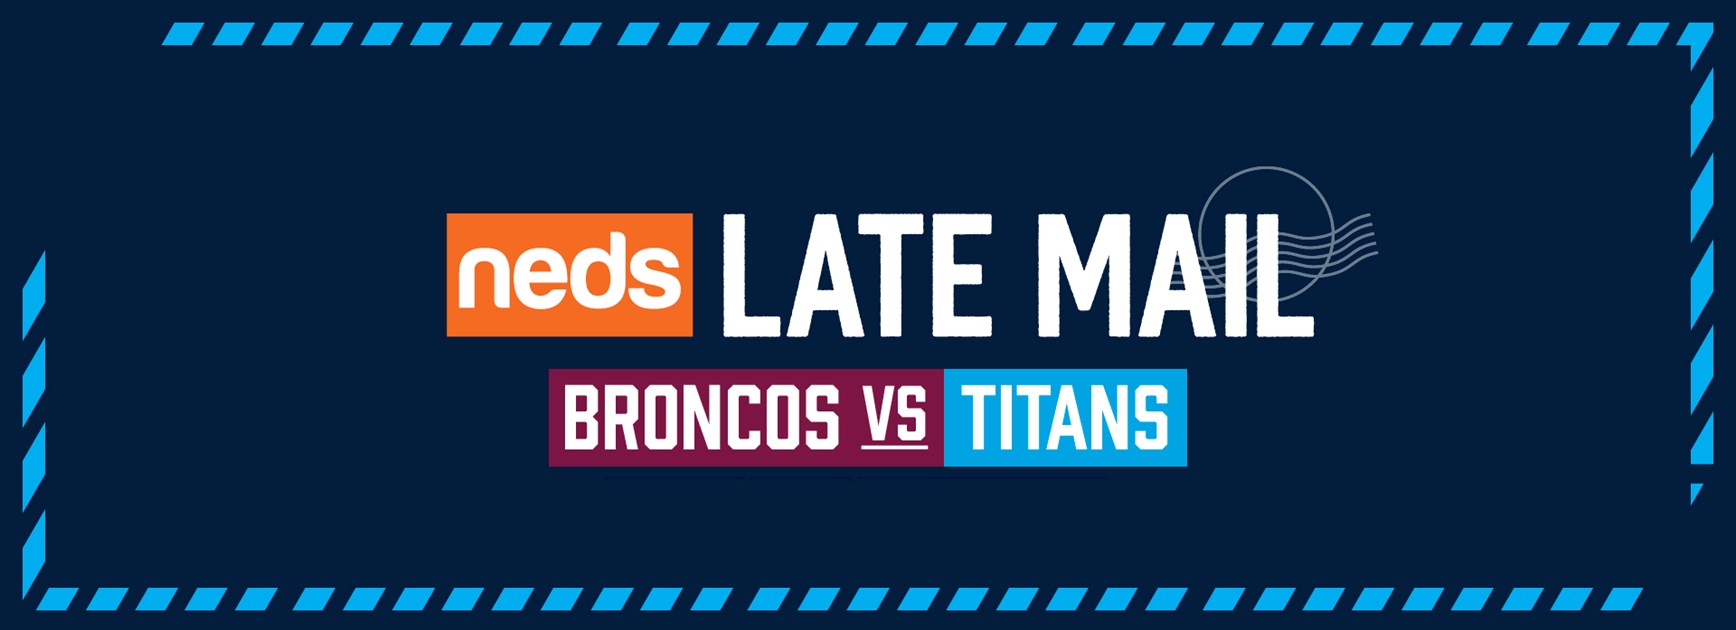 LATE MAIL: Titans Round 7 To Take On Broncos At Suncorp Stadium